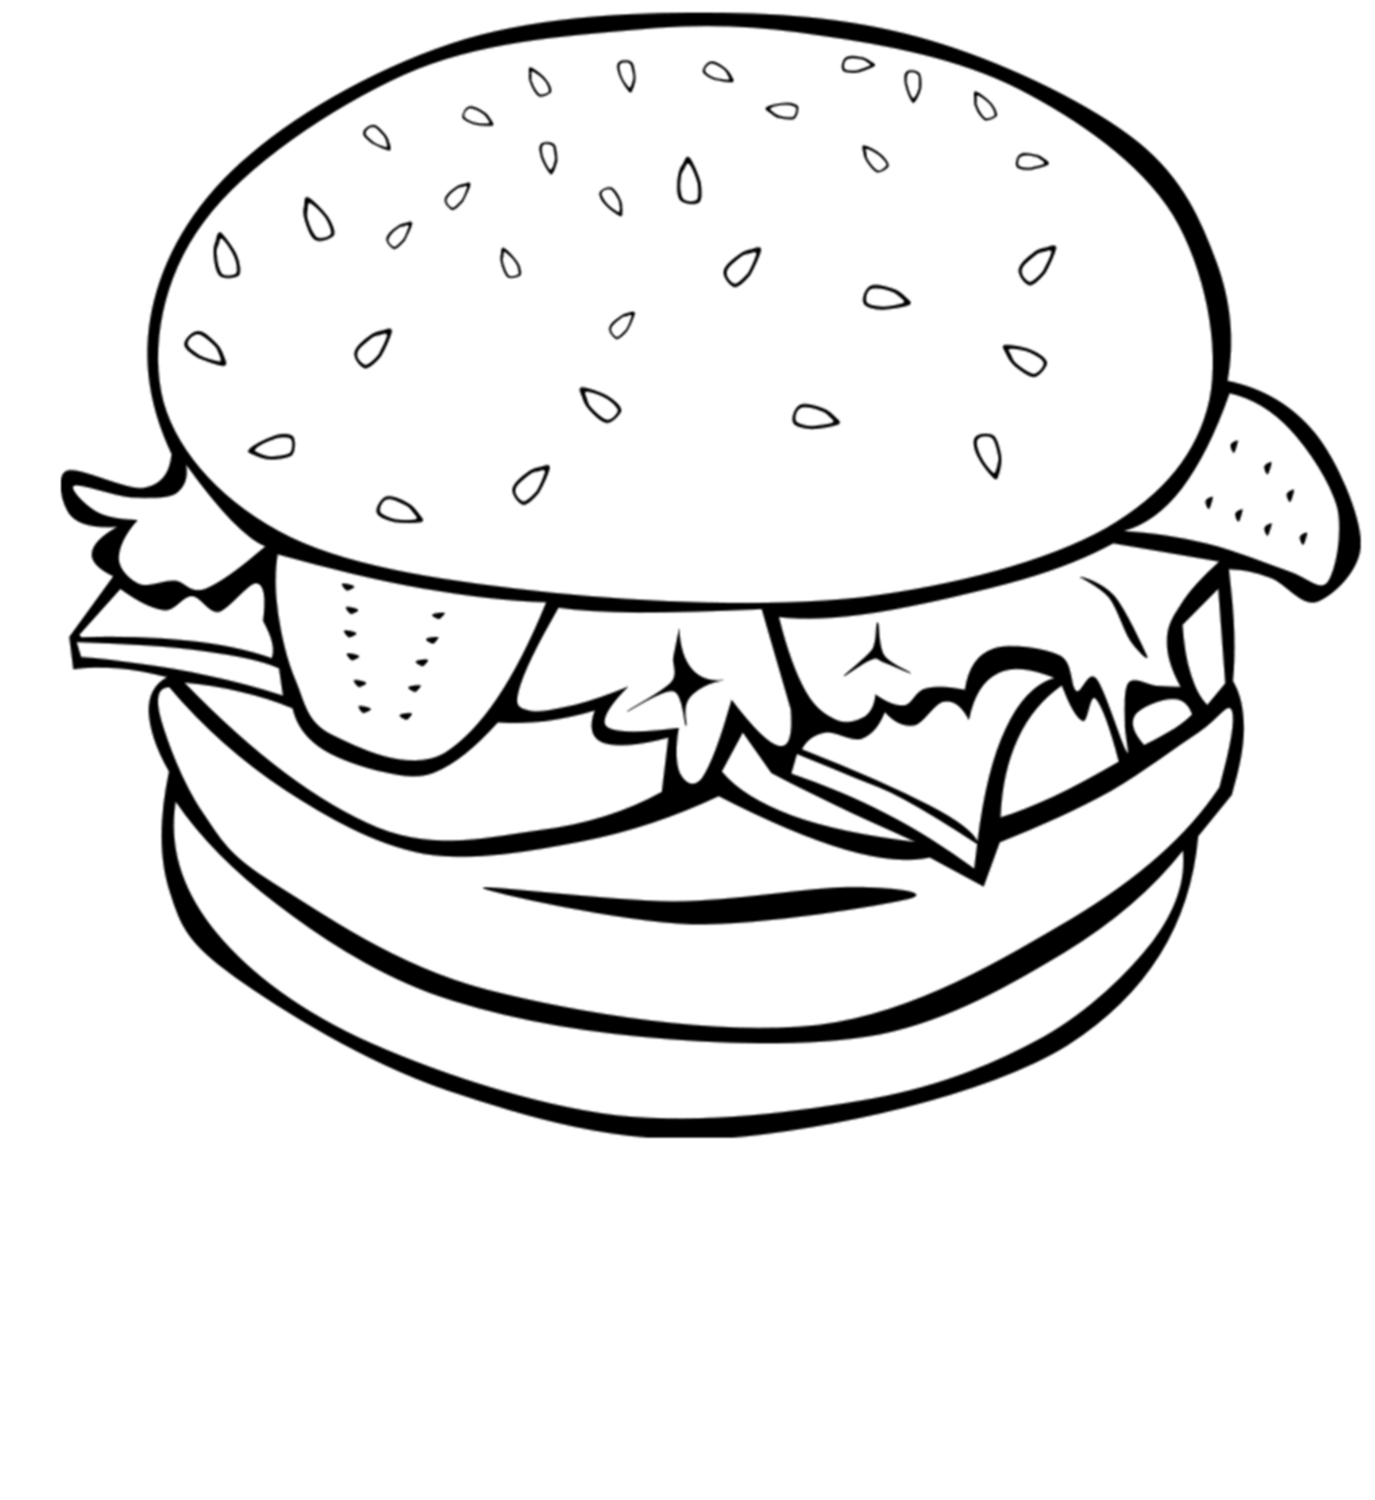 Pix For > Burger Line Drawing